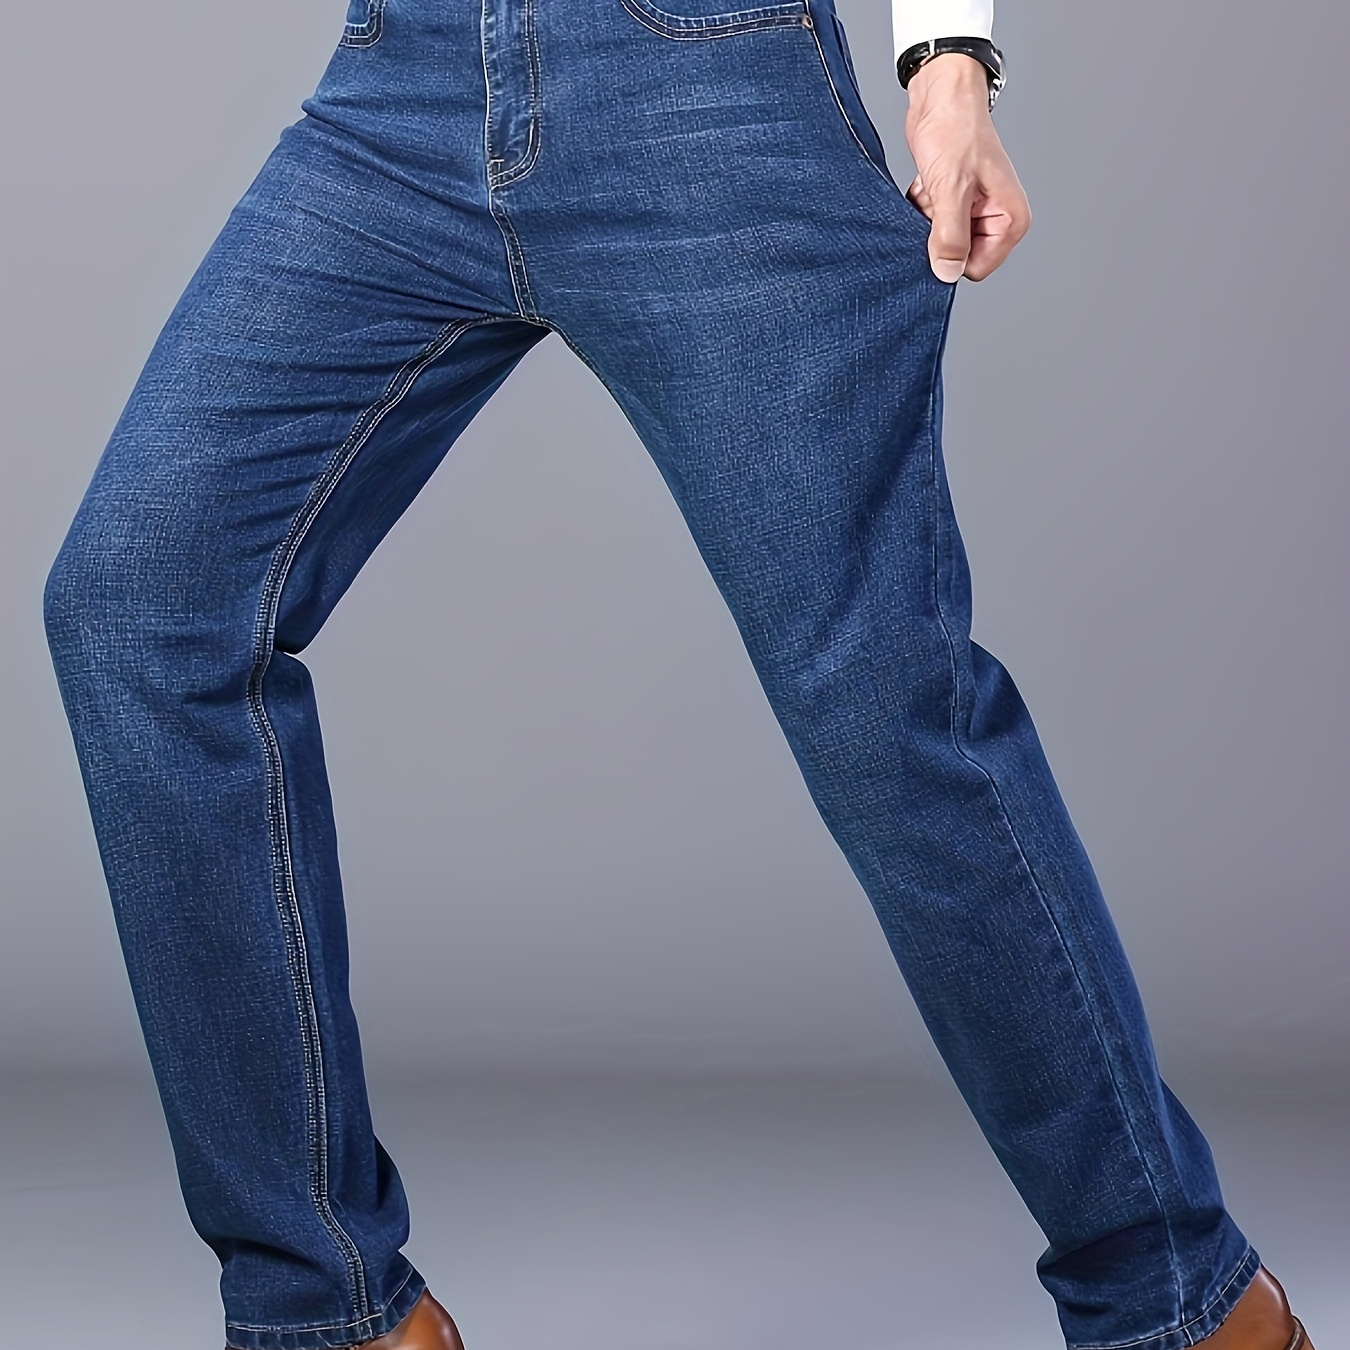 

Men's Solid Denim Trousers With Pockets, Causal Cotton Blend Jeans For Outdoor Activities